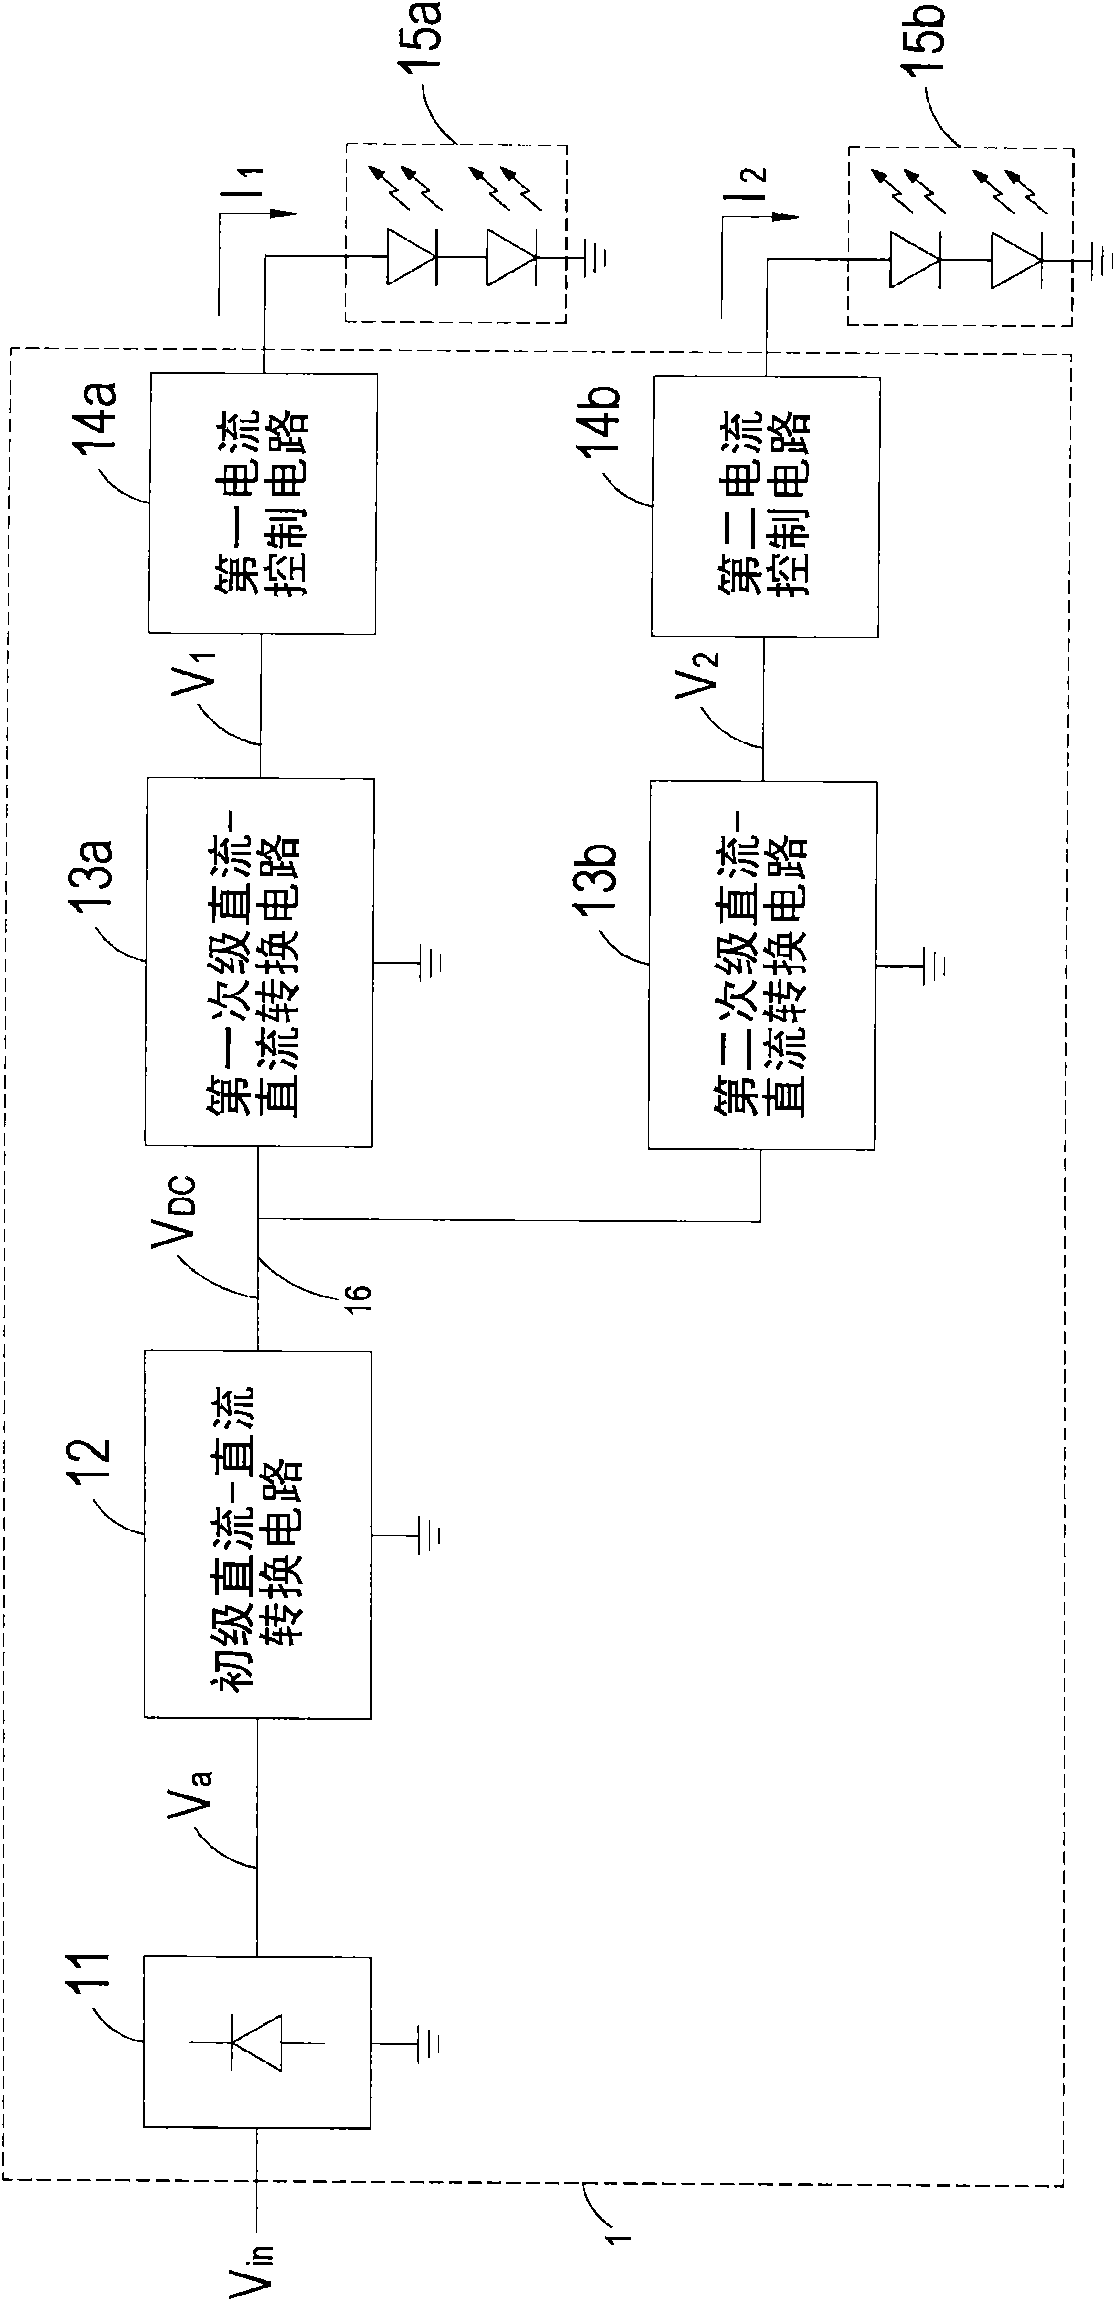 Current feed circuit and current control circuit of light emitting diode